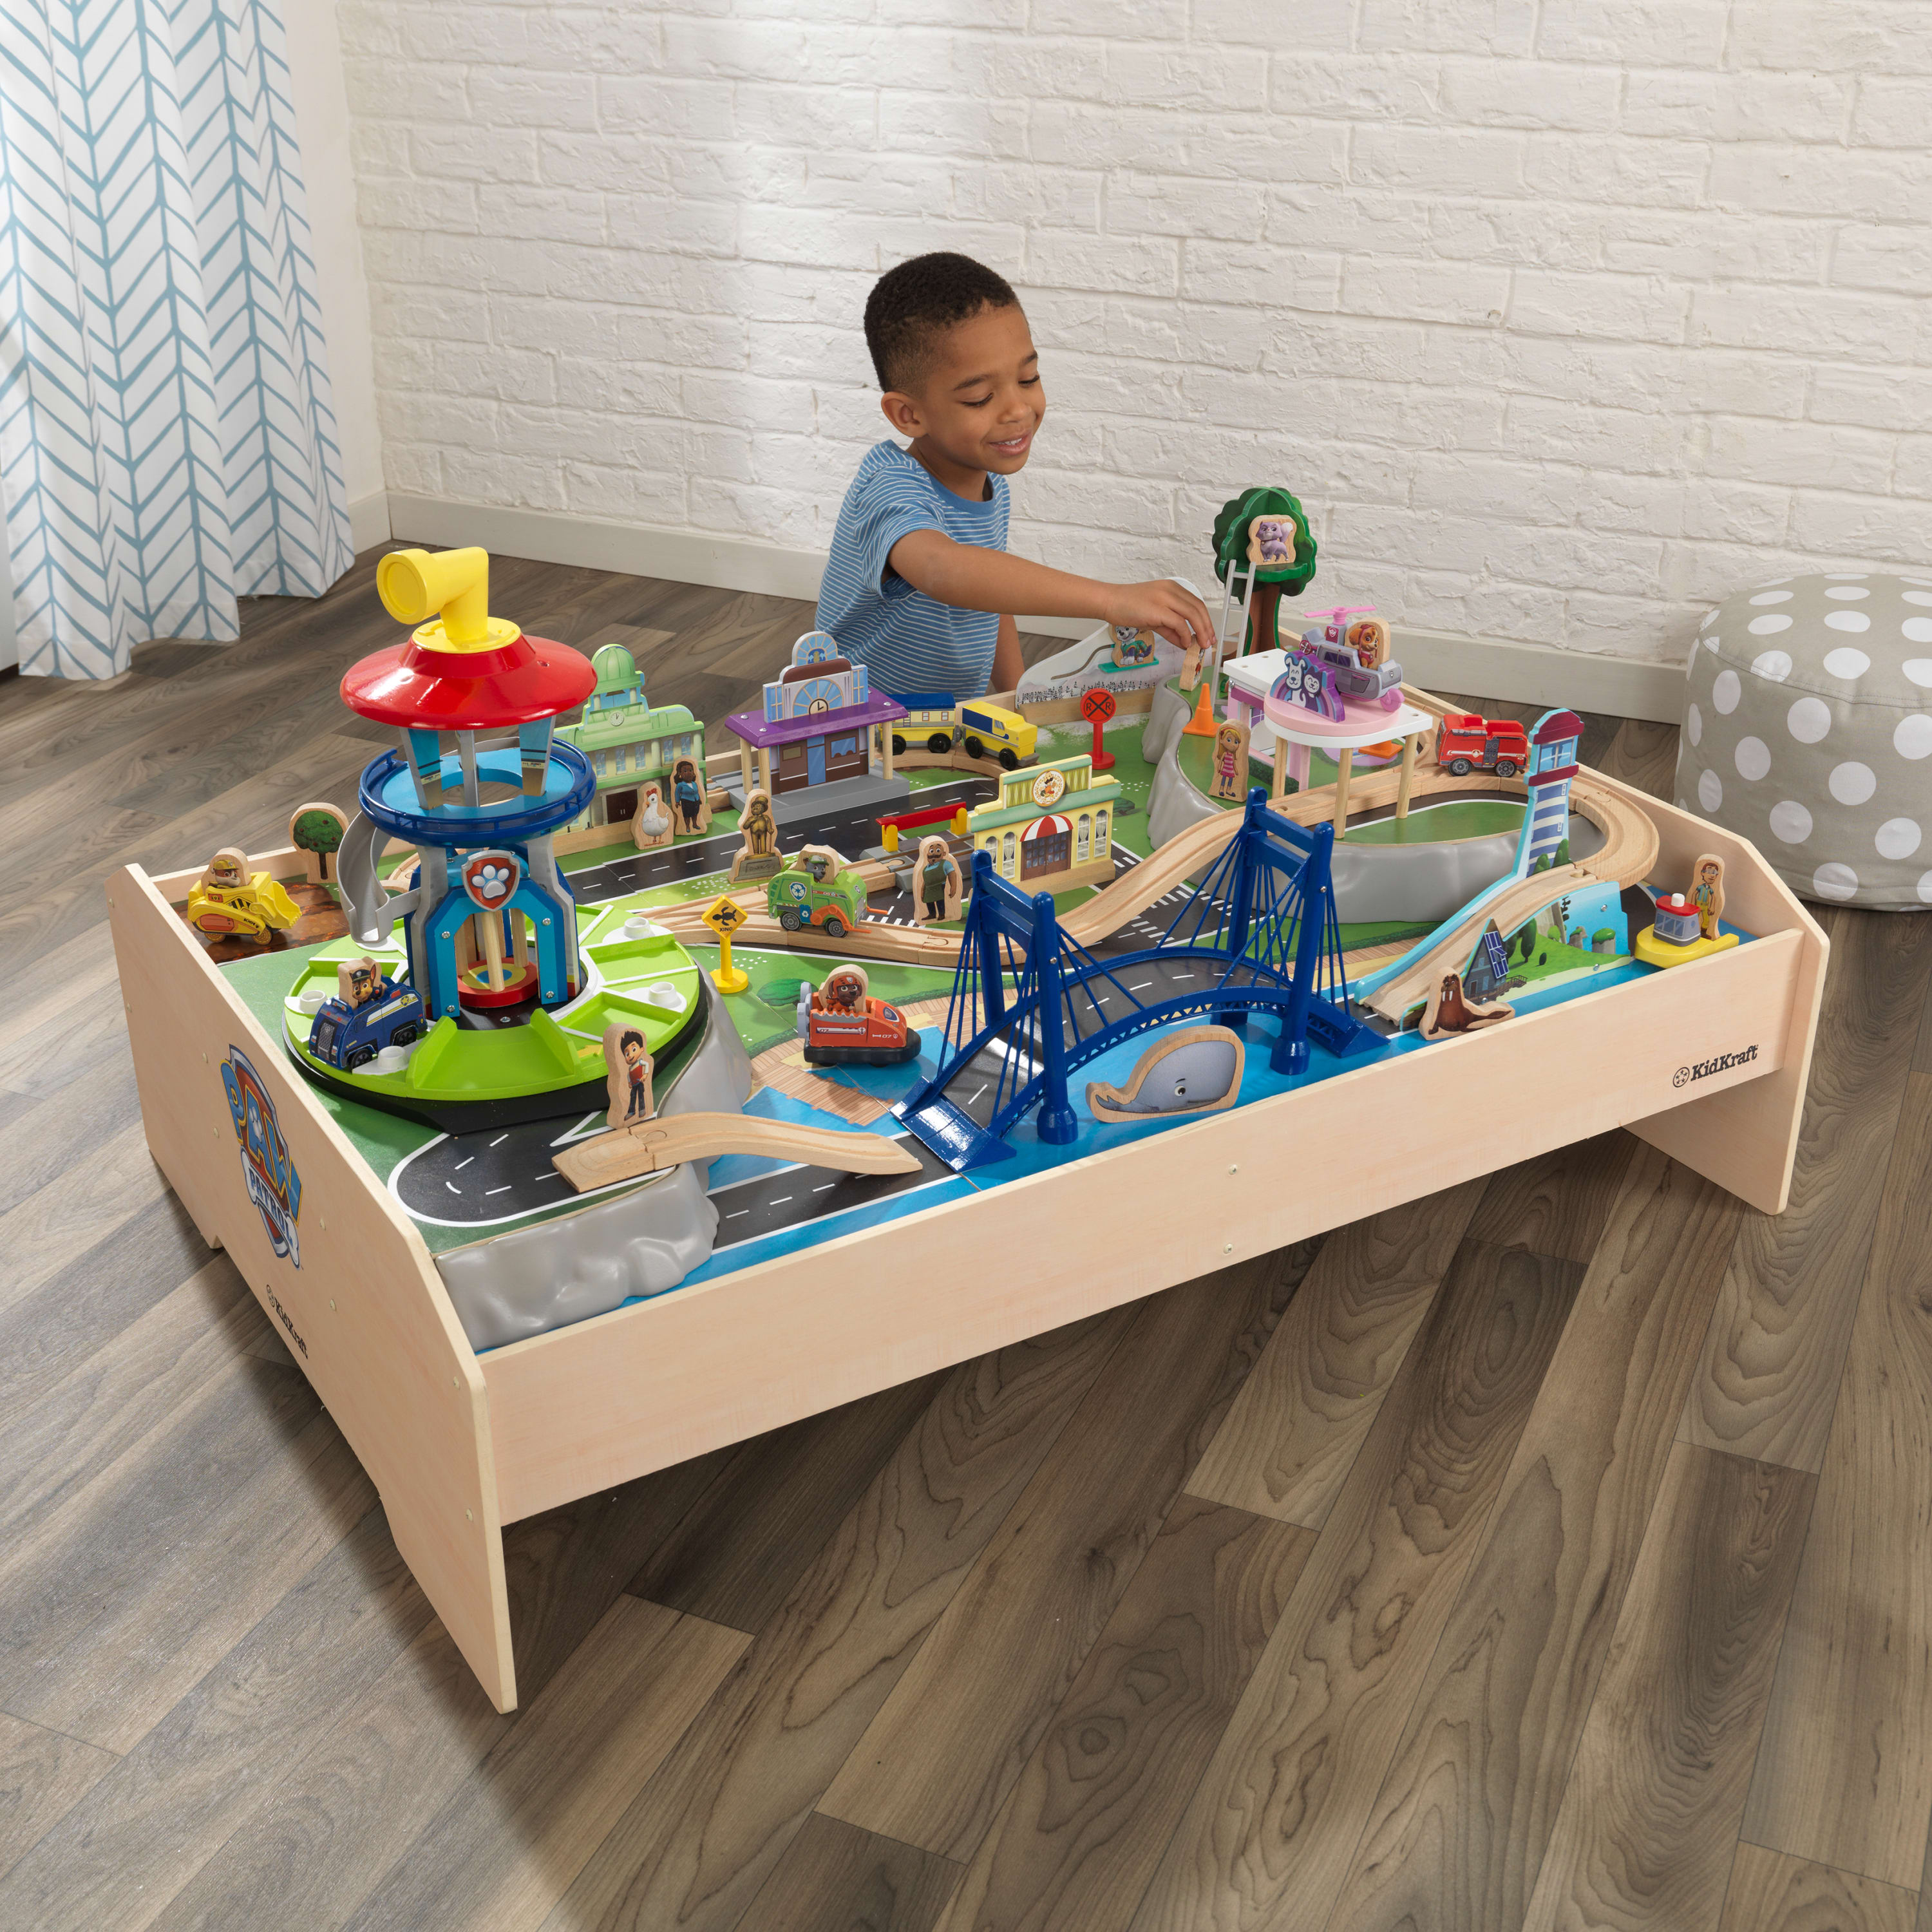 KidKraft PAW Patrol Adventure Bay Wooden Play Table with 73 Accessories - image 3 of 10